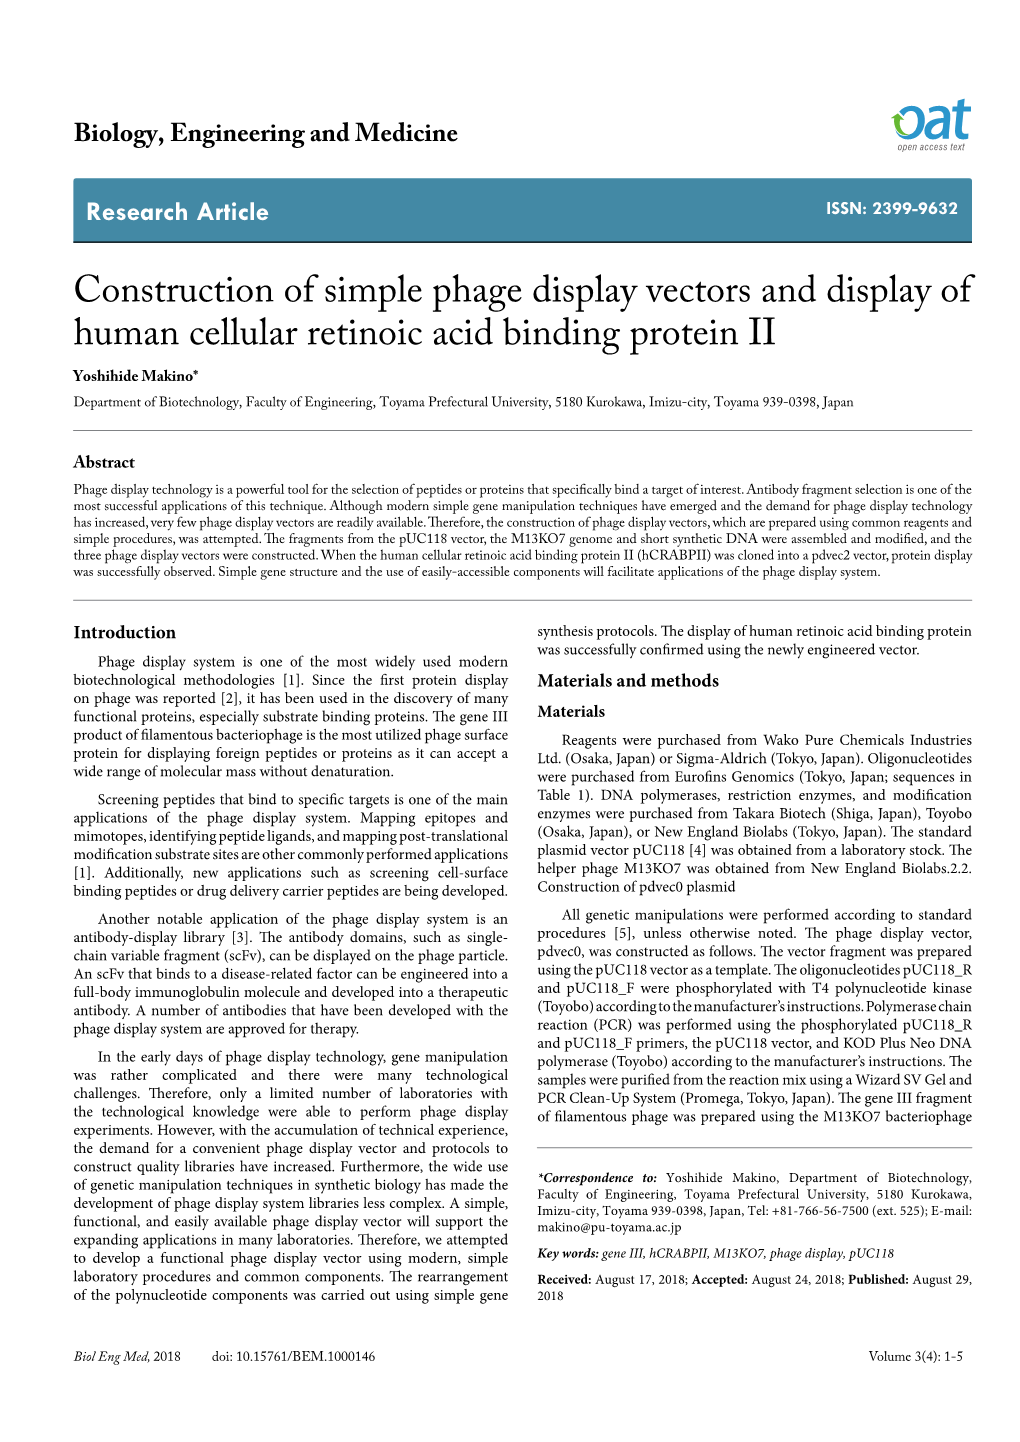 Construction of Simple Phage Display Vectors and Display of Human